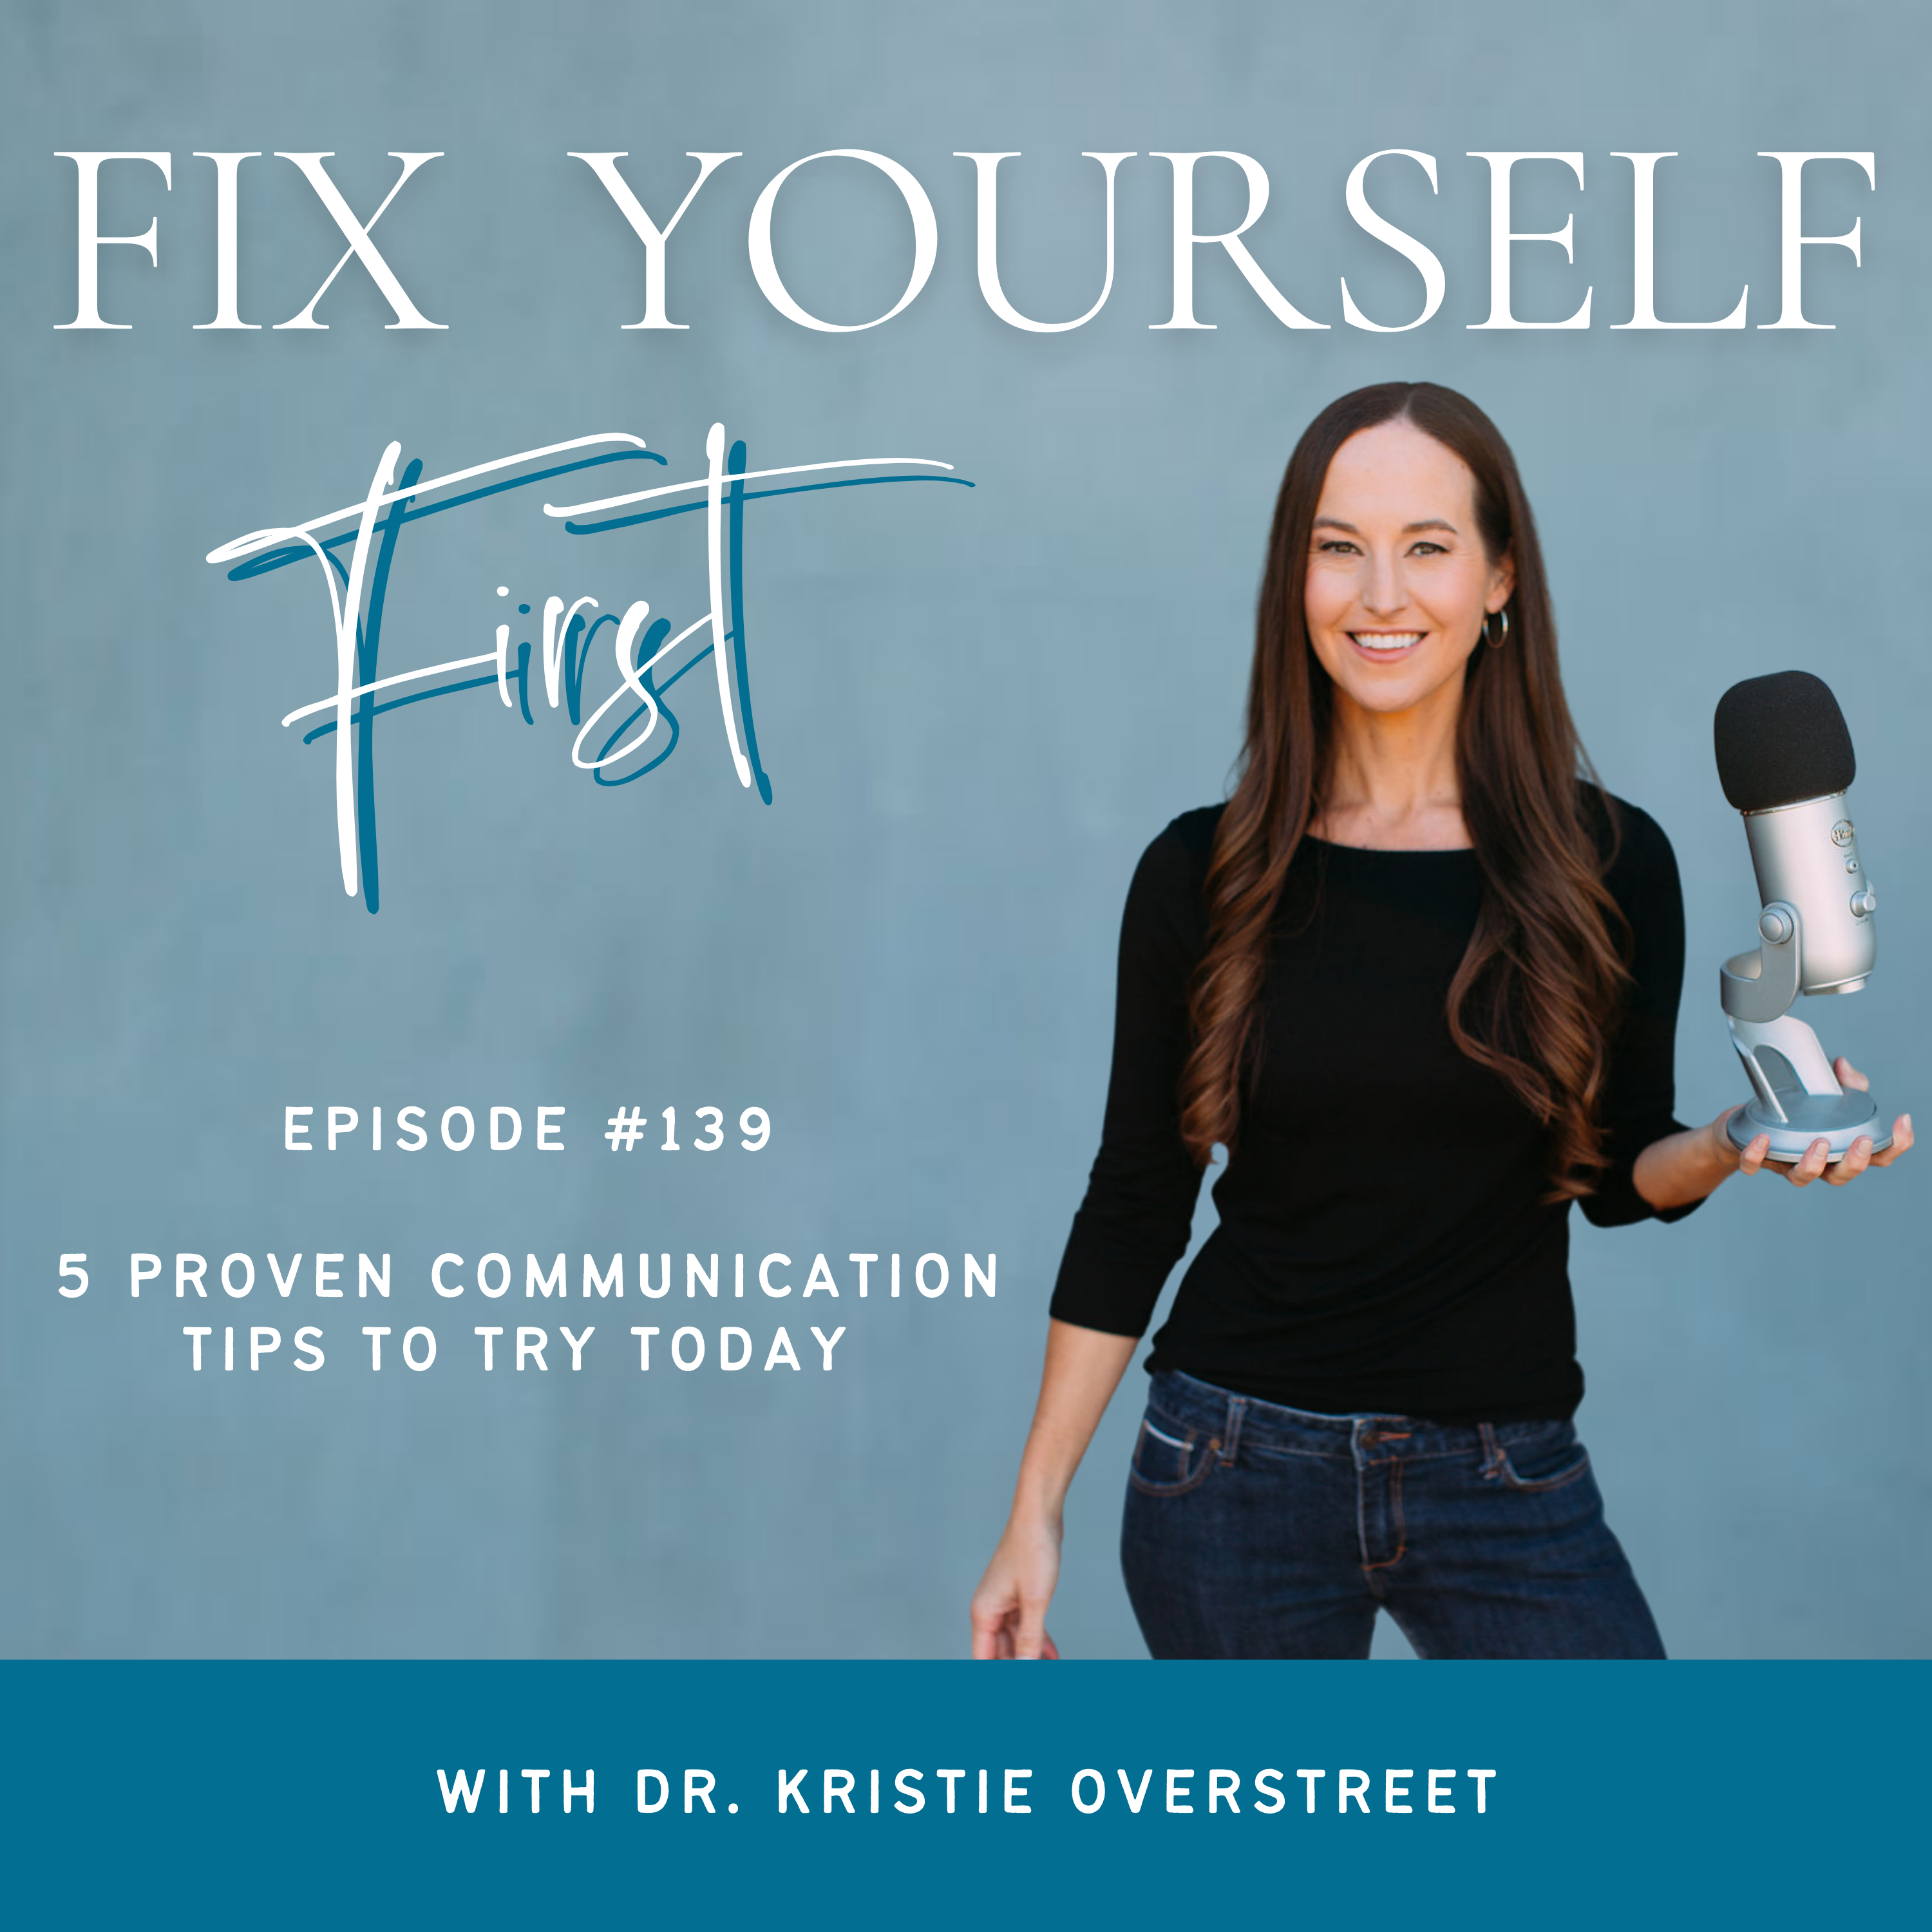 Fix Yourself First Episode 139 5 Proven Communication Tips to Try Today